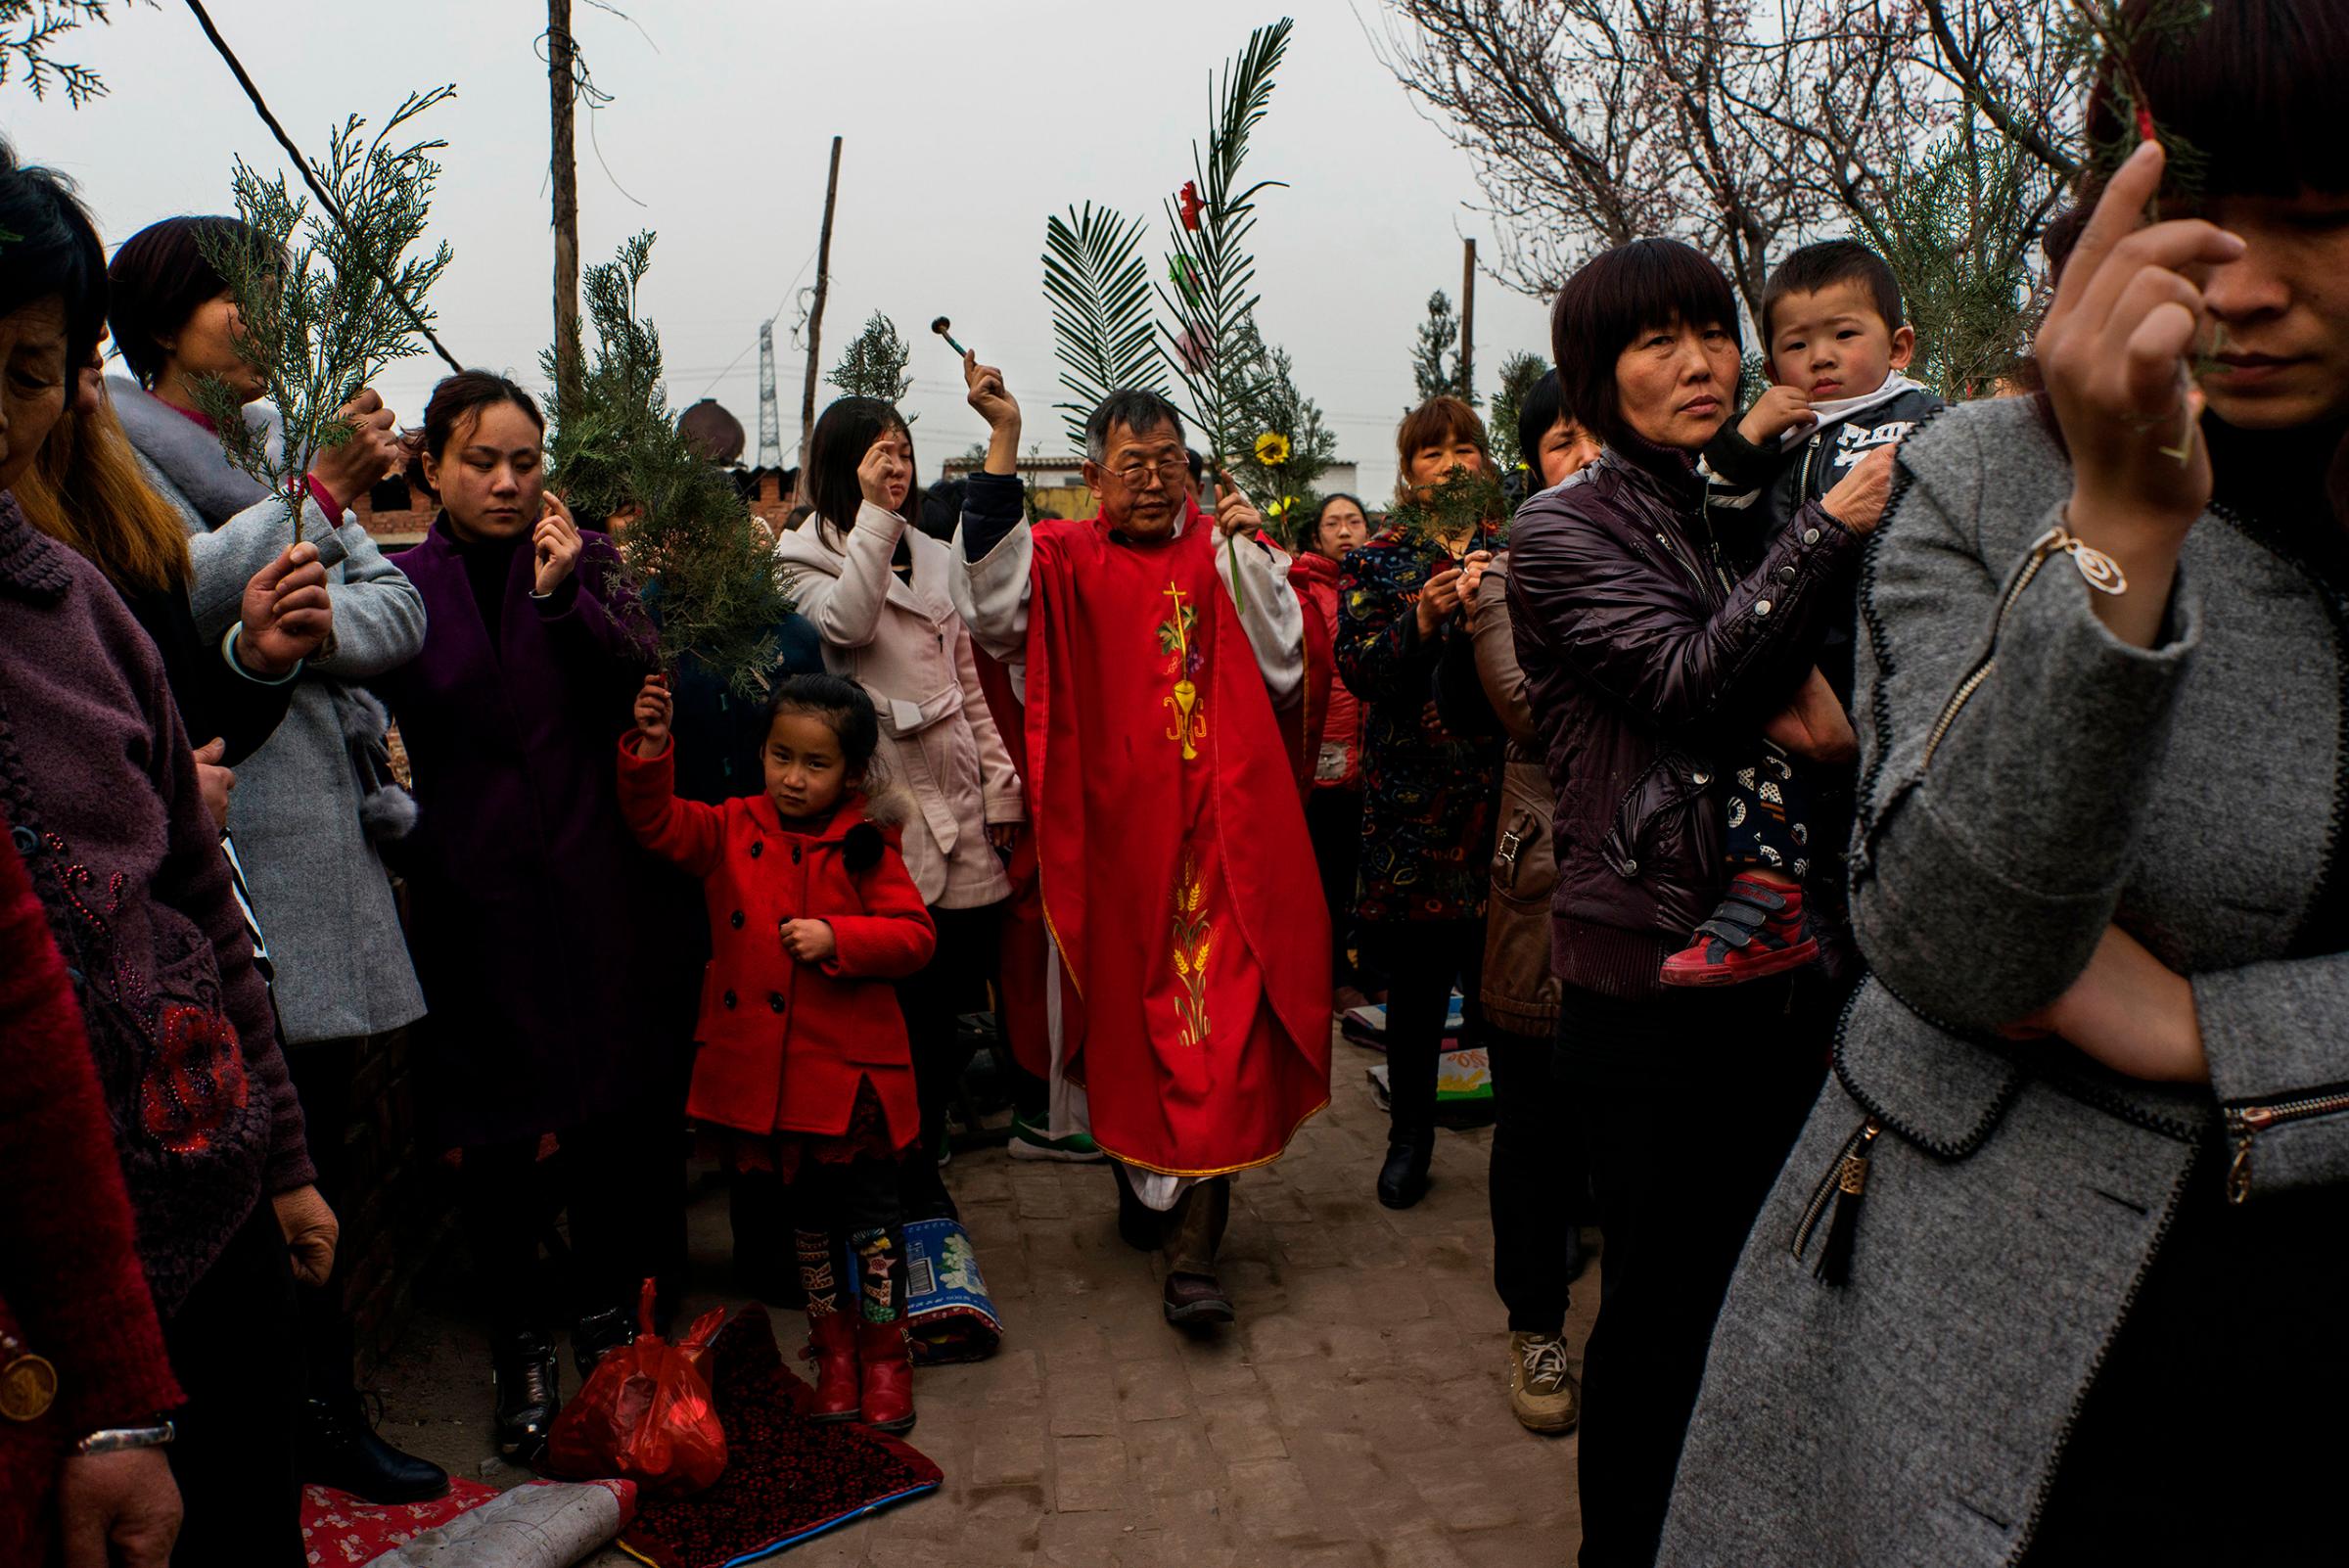 Dissident Catholic Priest Dong Baolu leads a procession through the congregation at an underground Palm Sunday service in the yard of a house in Youtong village, Shijiazhuang, China, March 20, 2016.